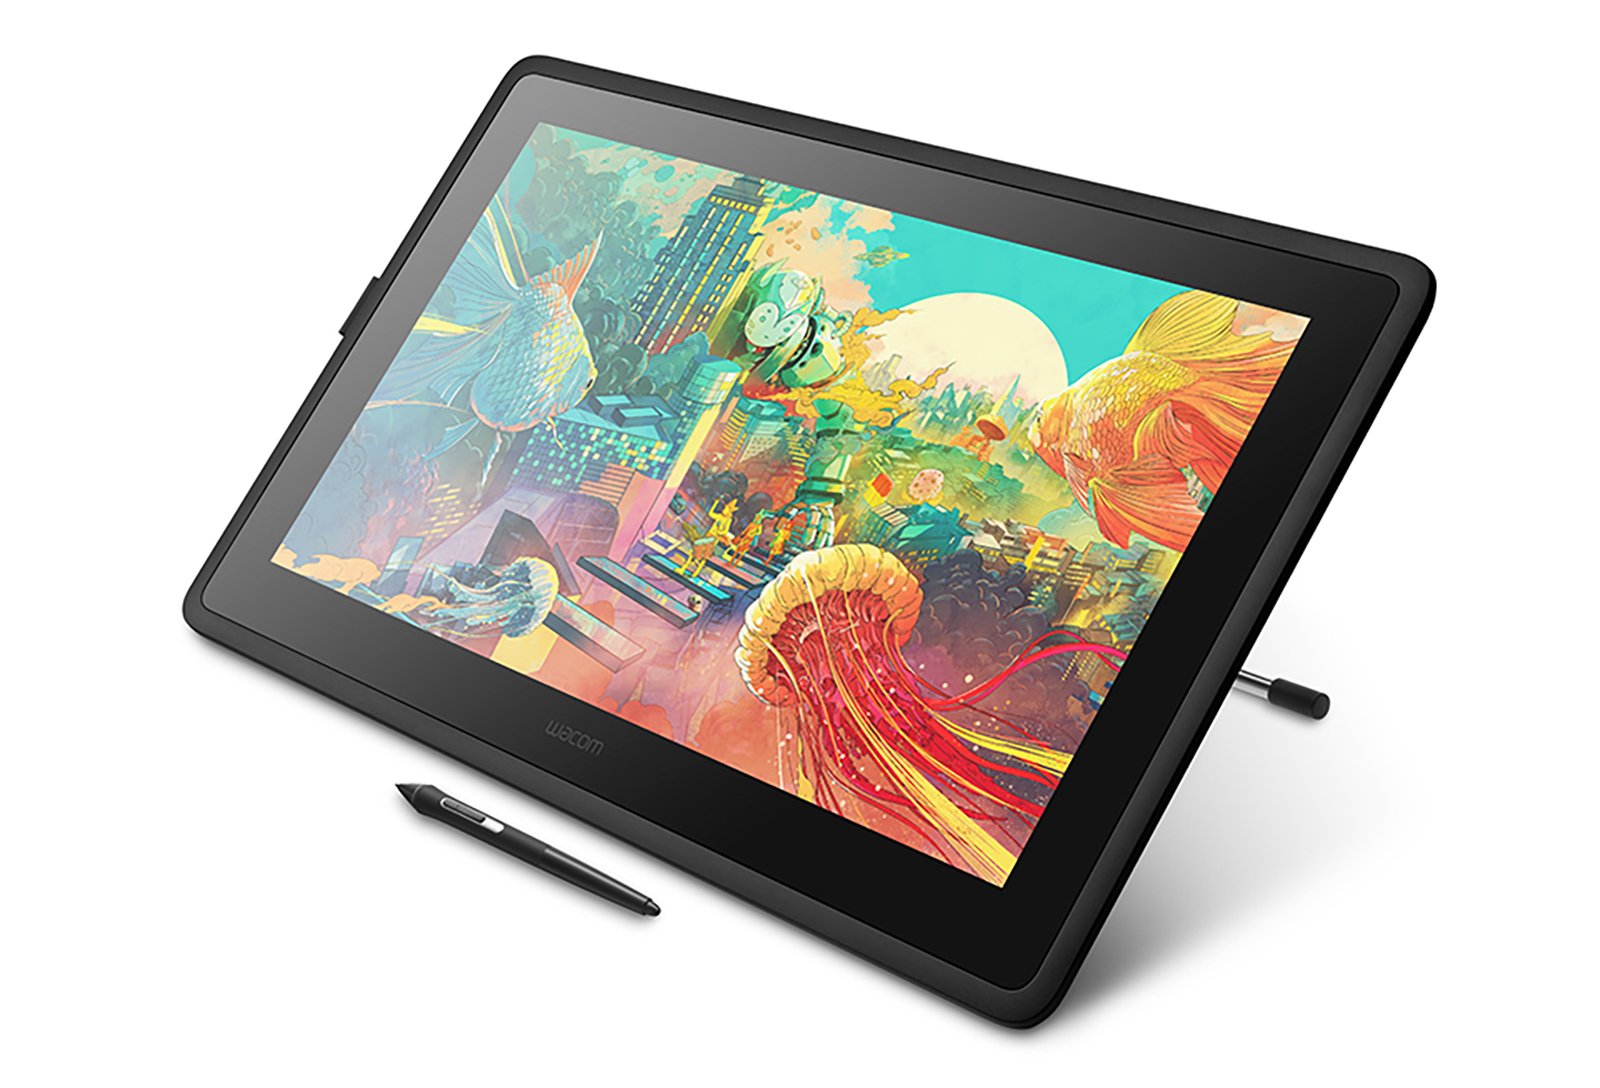 Cintiq 22 is an Affordable Pen Display for BudgetConscious Pros